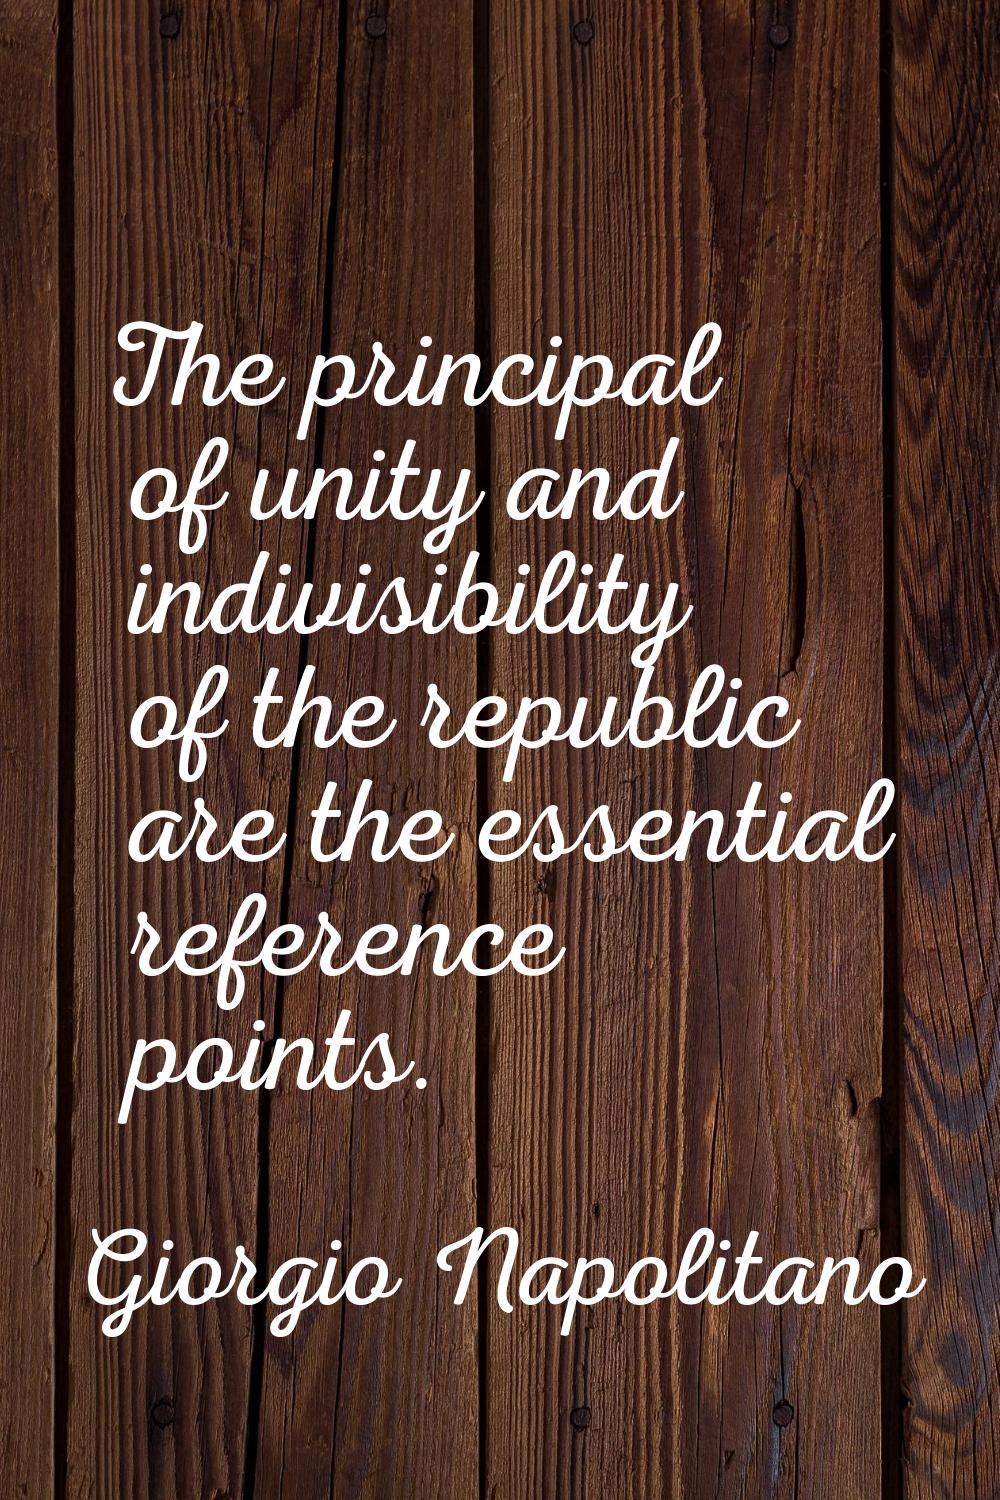 The principal of unity and indivisibility of the republic are the essential reference points.